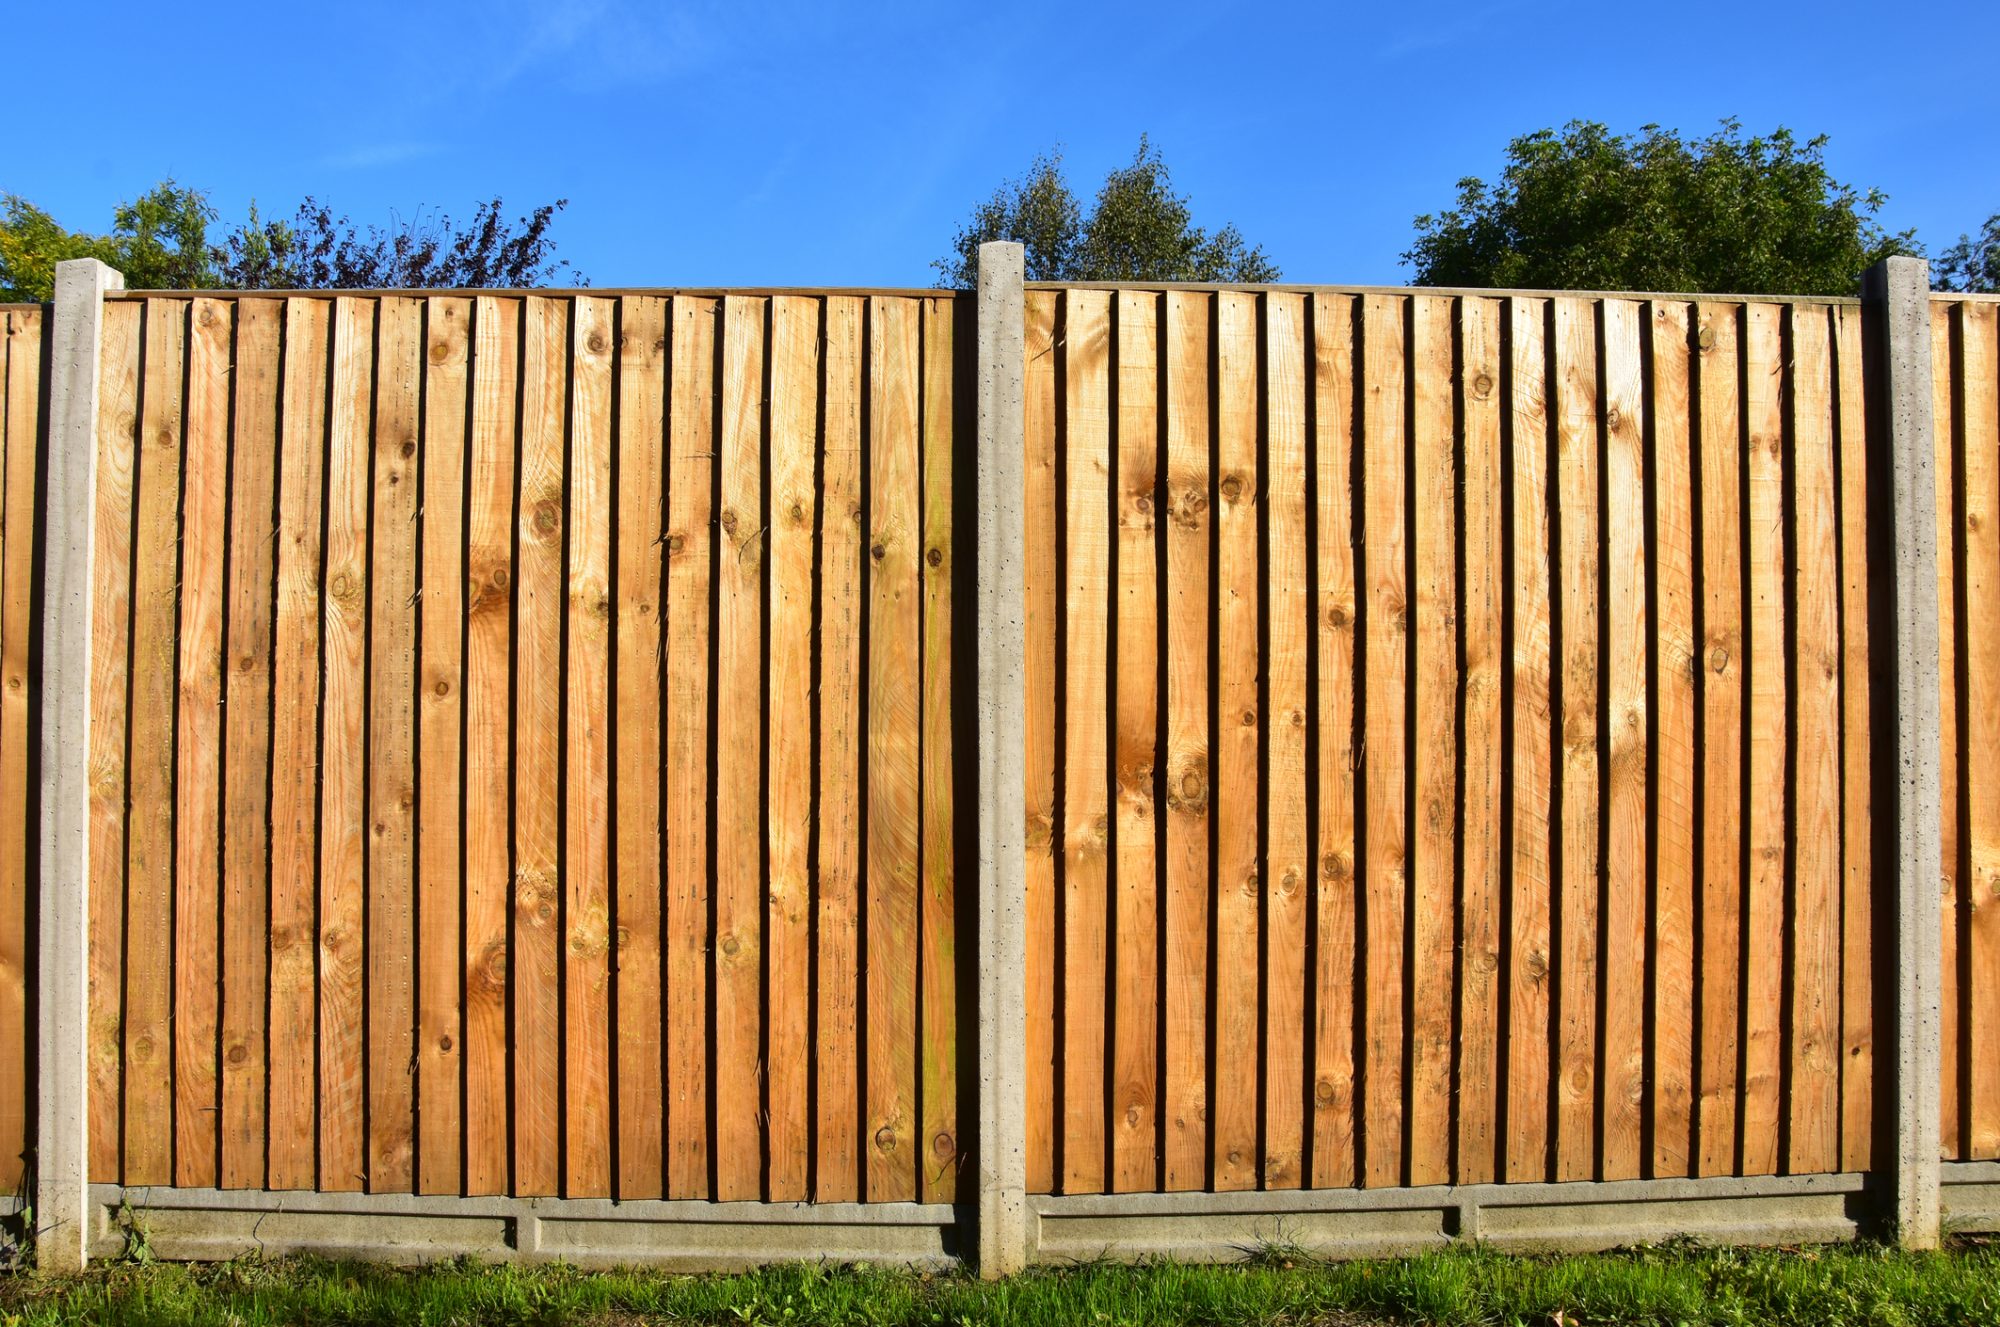 Two panels of a classic wooden featheredge garden fence with concrete support posts